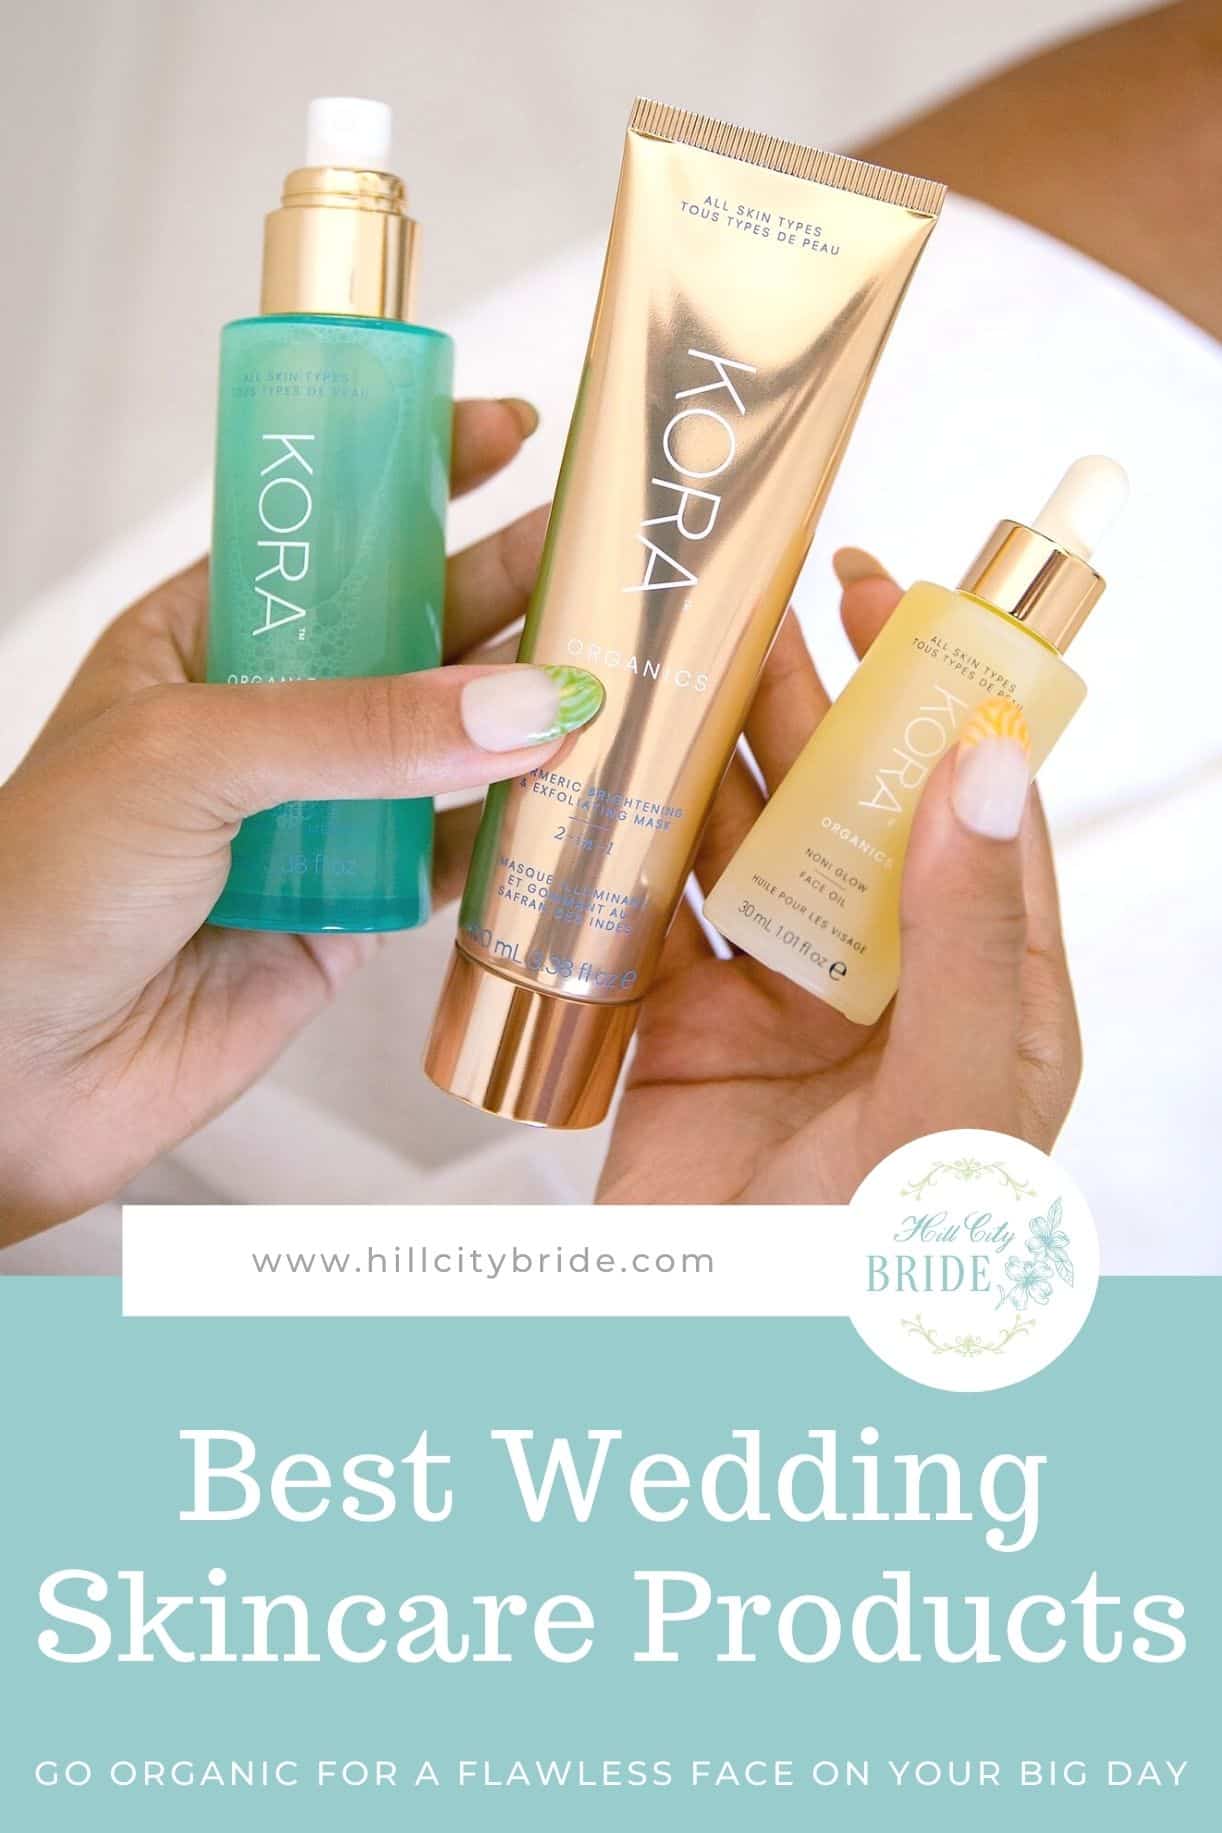 Best Wedding Skincare Products from Kora